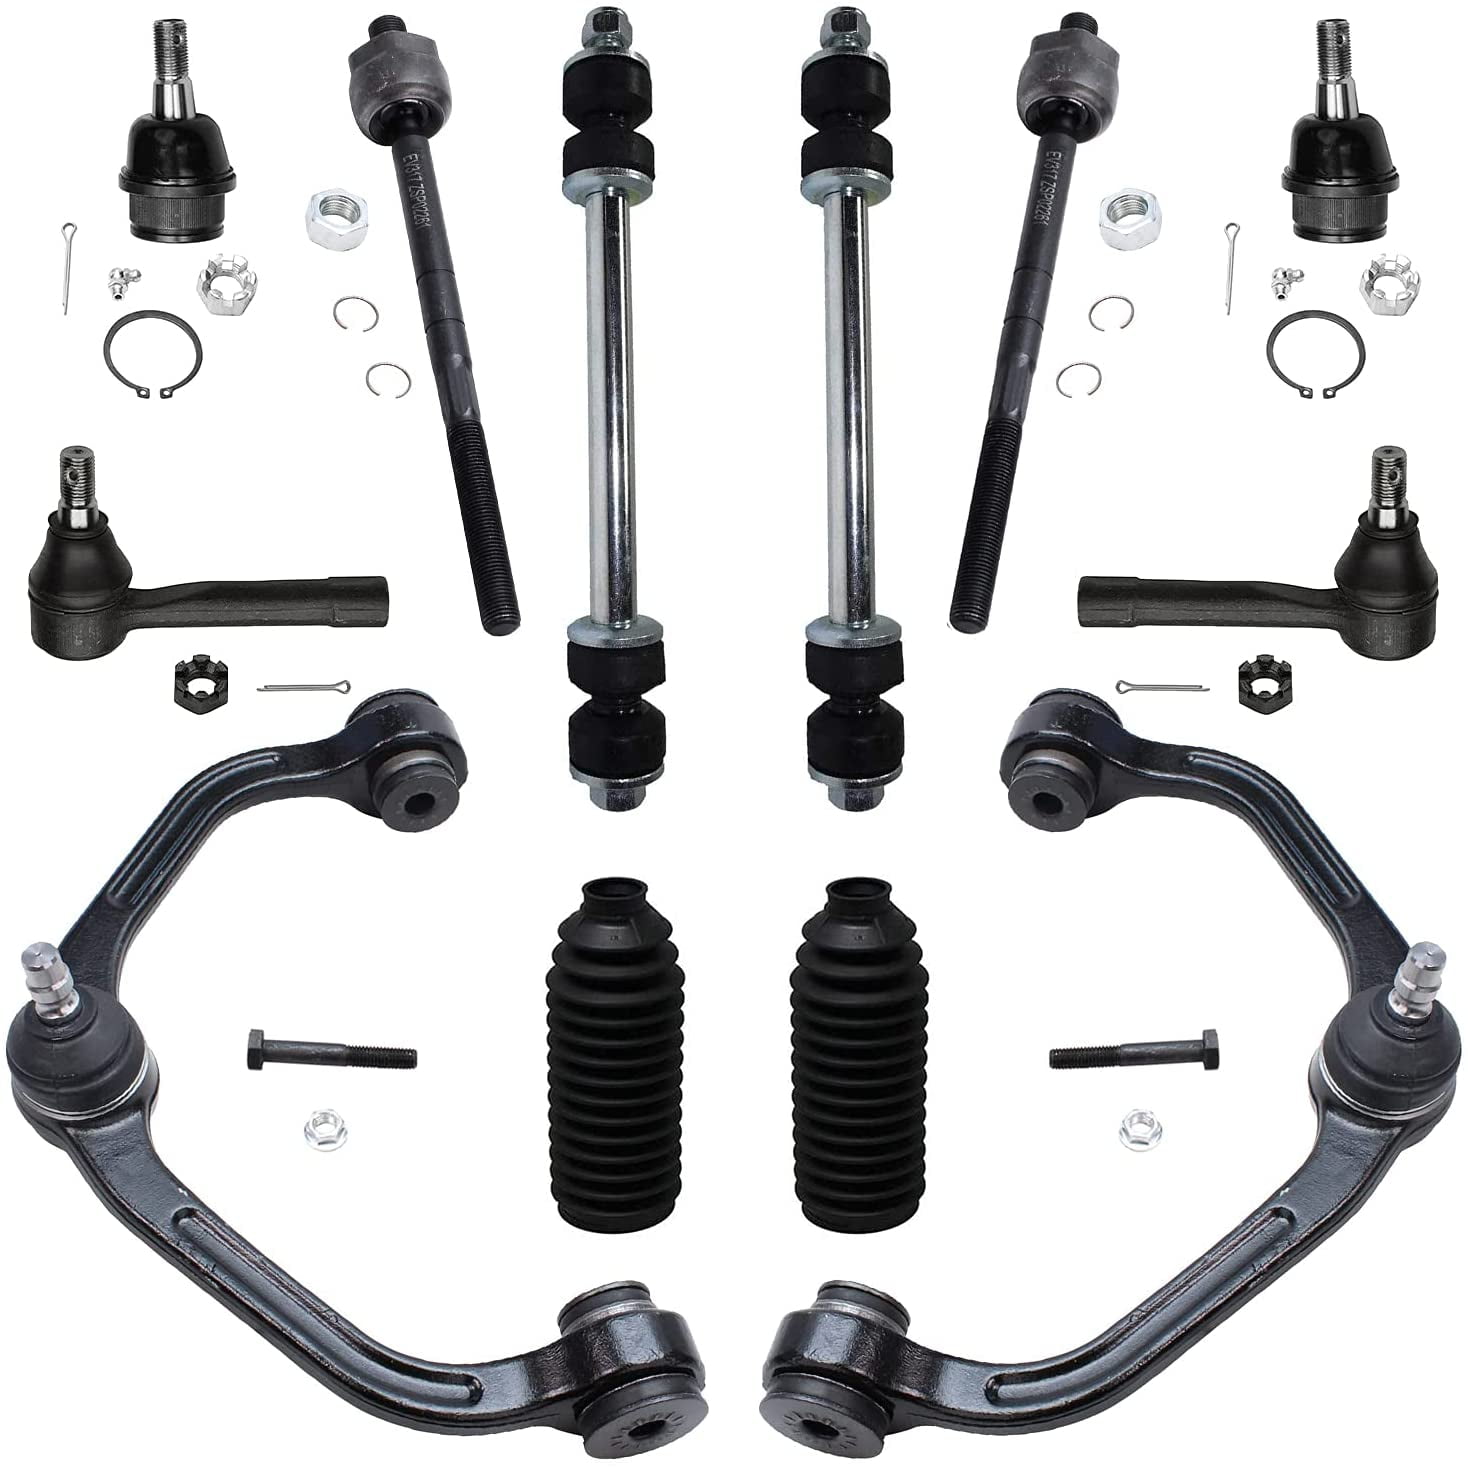 Pair Front Sway Bar End Links Kit Set for Dodge Ford Mercury Mazda Pickup Truck